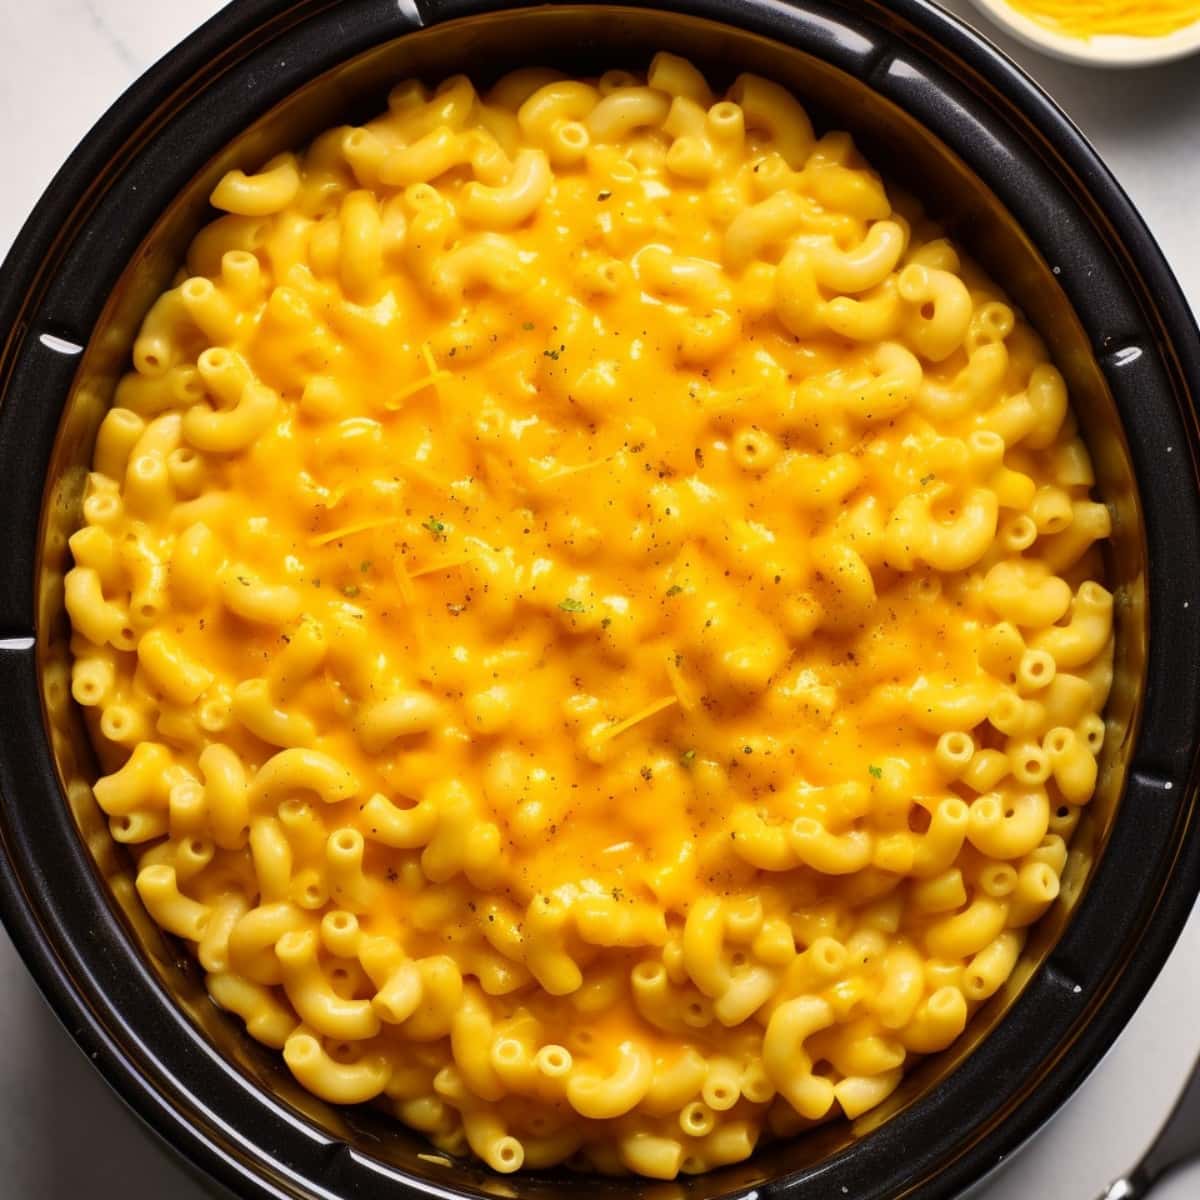 Trisha Yearwood Crockpot Mac and Cheese with Melted Cheese